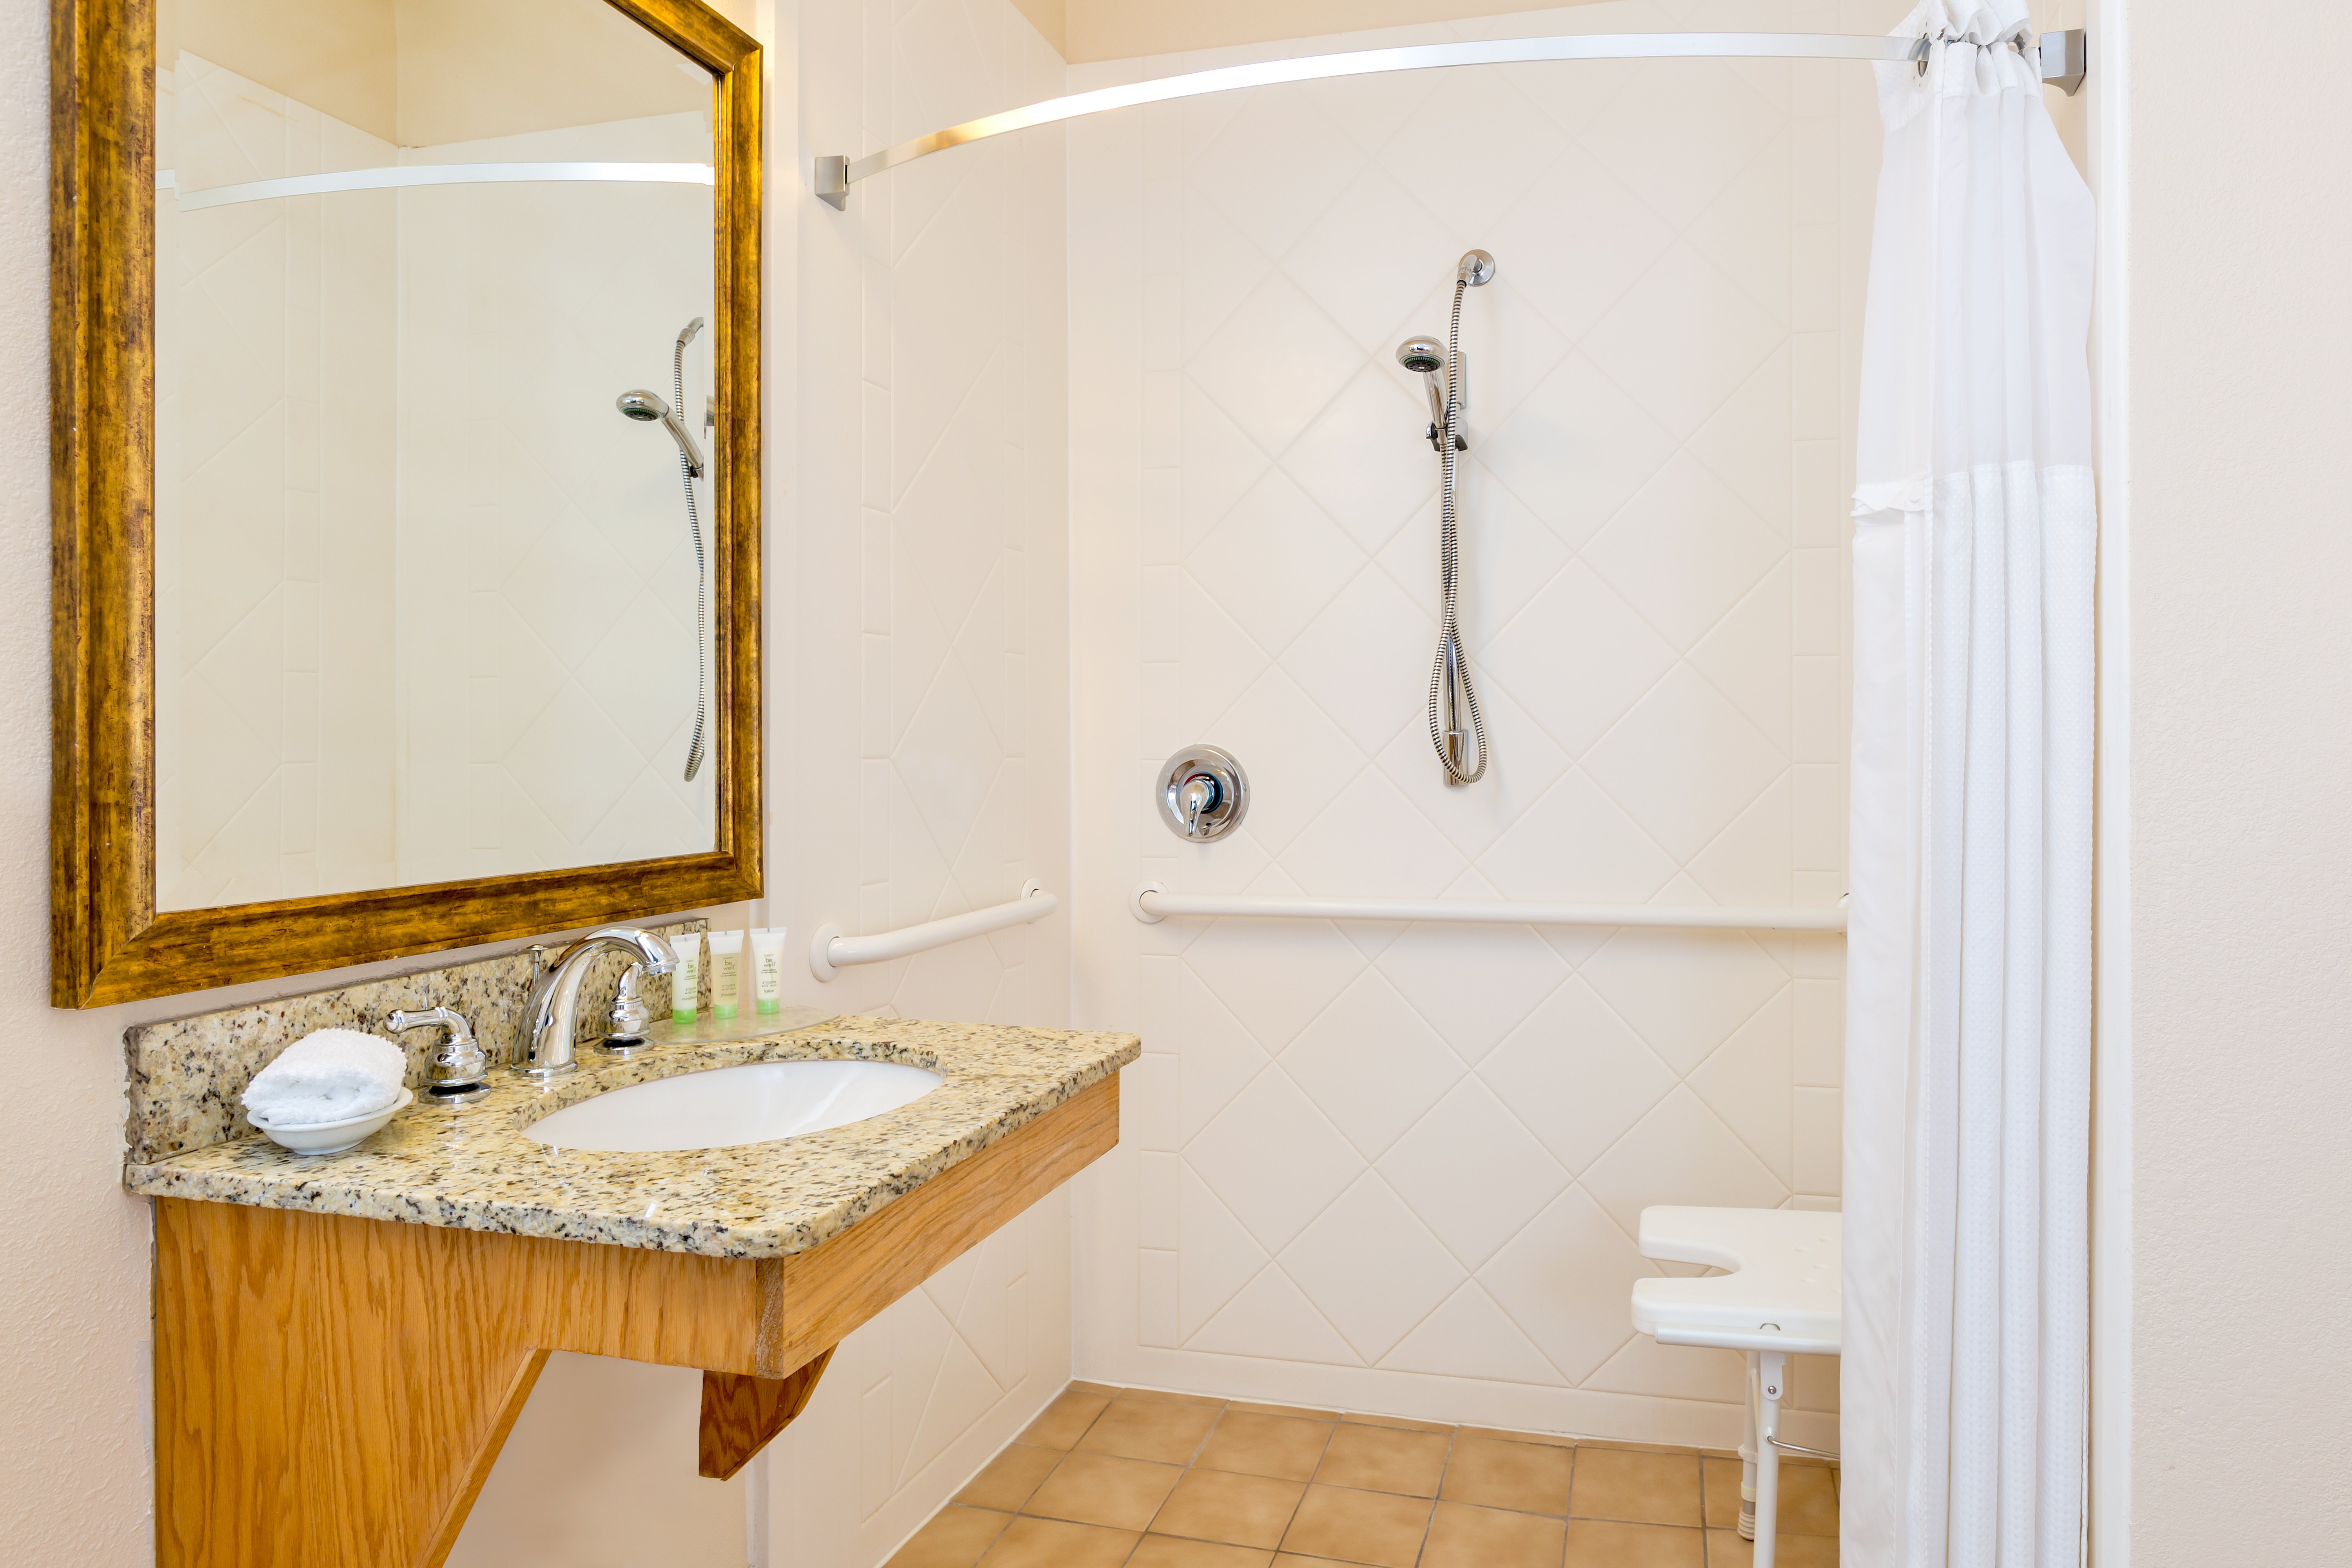 Wheelchair accessible Guest Bath withroll-in shower